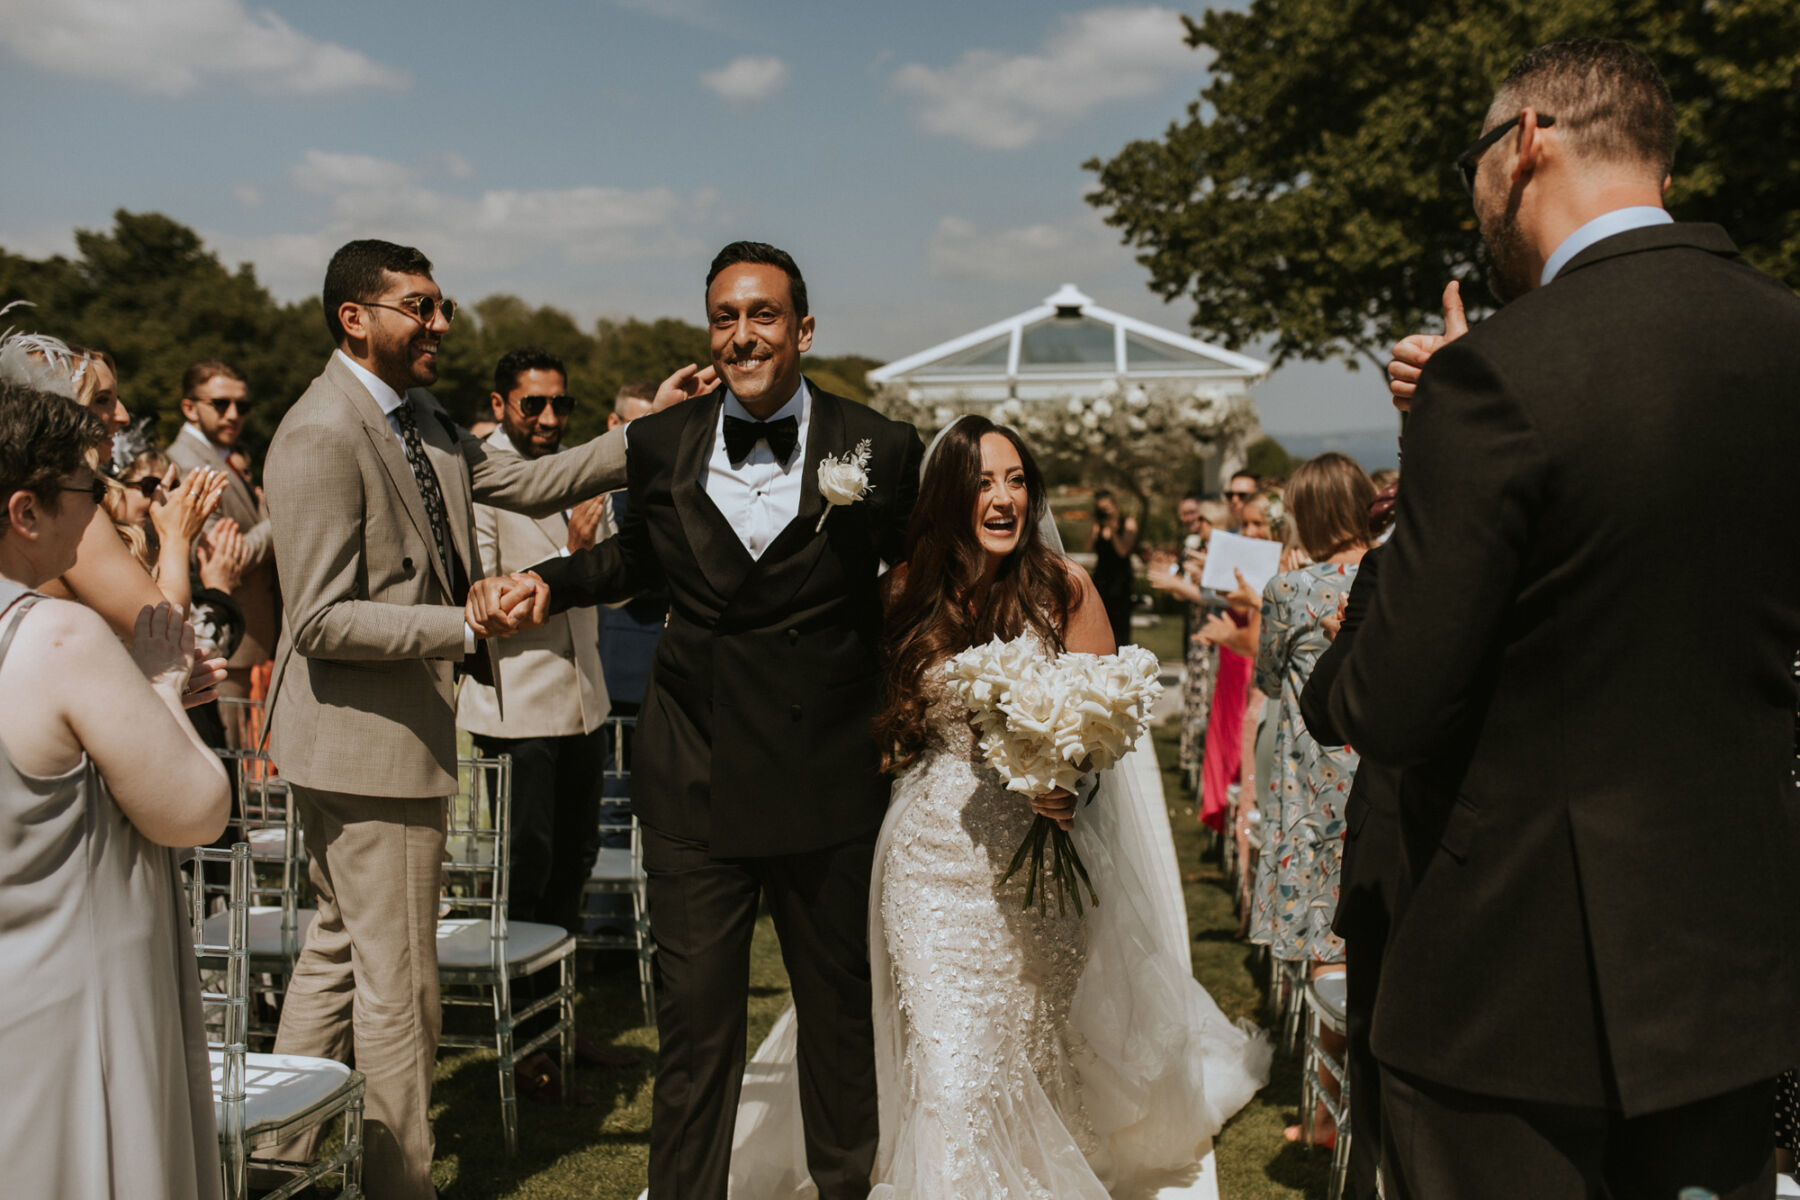 Black tie groom and bride carrying a modern all white wedding bouquet - just married at an outdoor ceremony at The Pennsylvania Castle Estate - a Dorset wedding venue on a clifftop with incredible sea views.